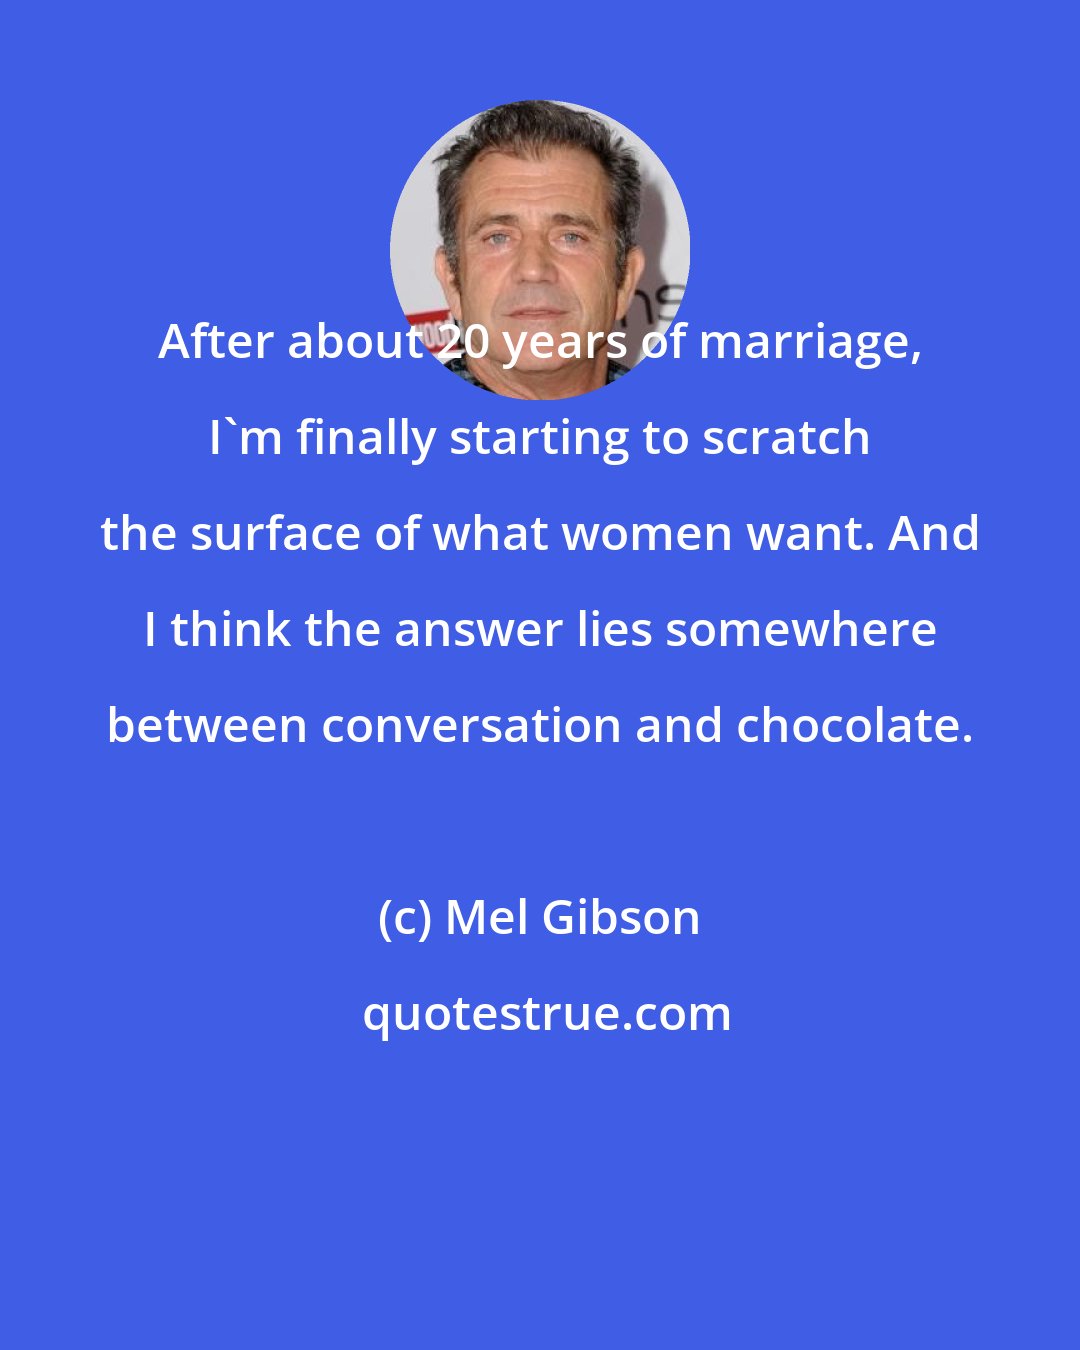 Mel Gibson: After about 20 years of marriage, I'm finally starting to scratch the surface of what women want. And I think the answer lies somewhere between conversation and chocolate.